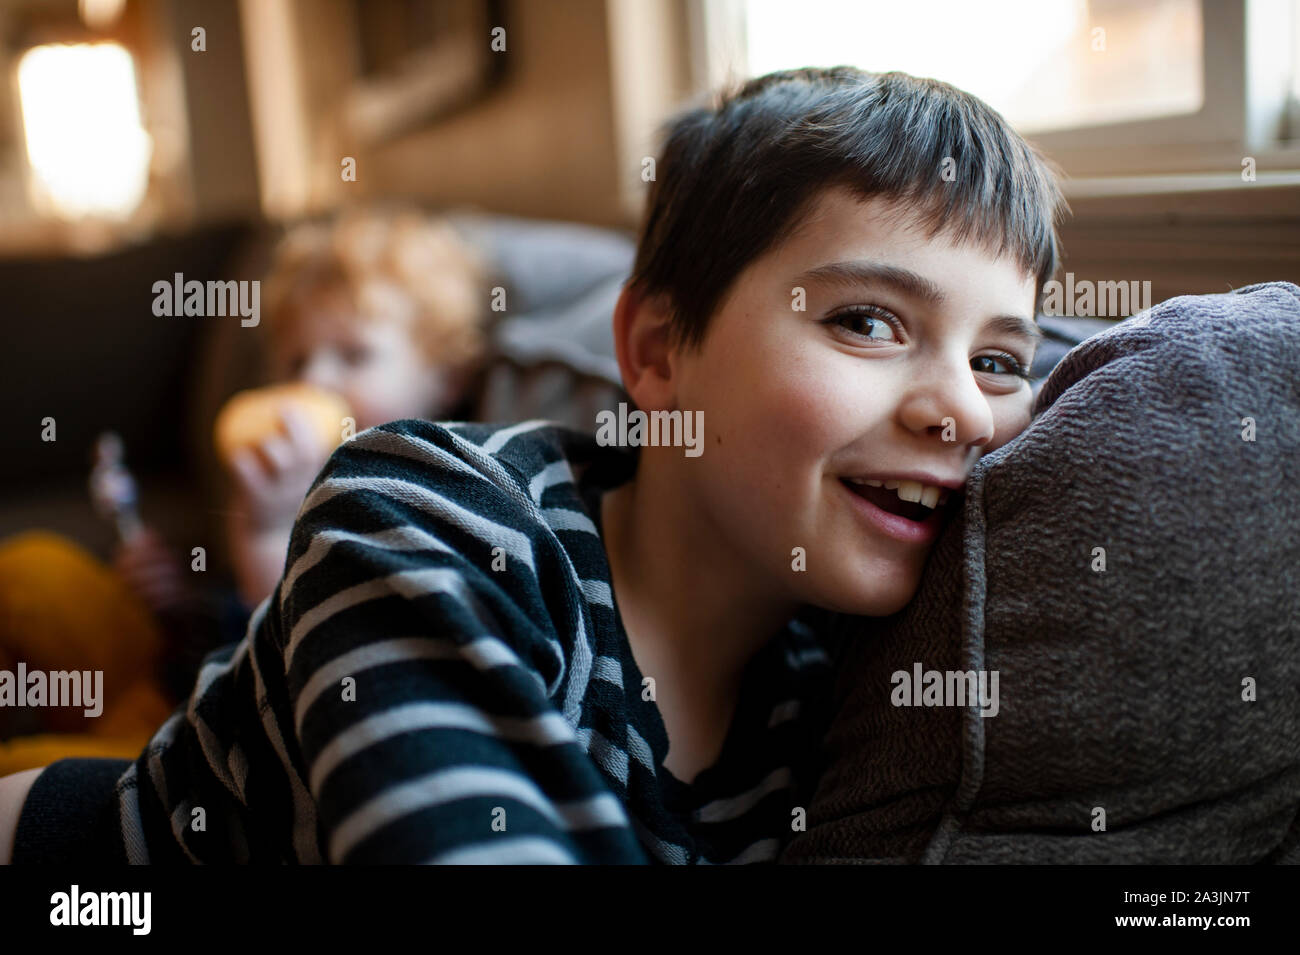 Happy 7 8 Year Old Boy Laying On Couch Smiling At Home Stock Photo Alamy